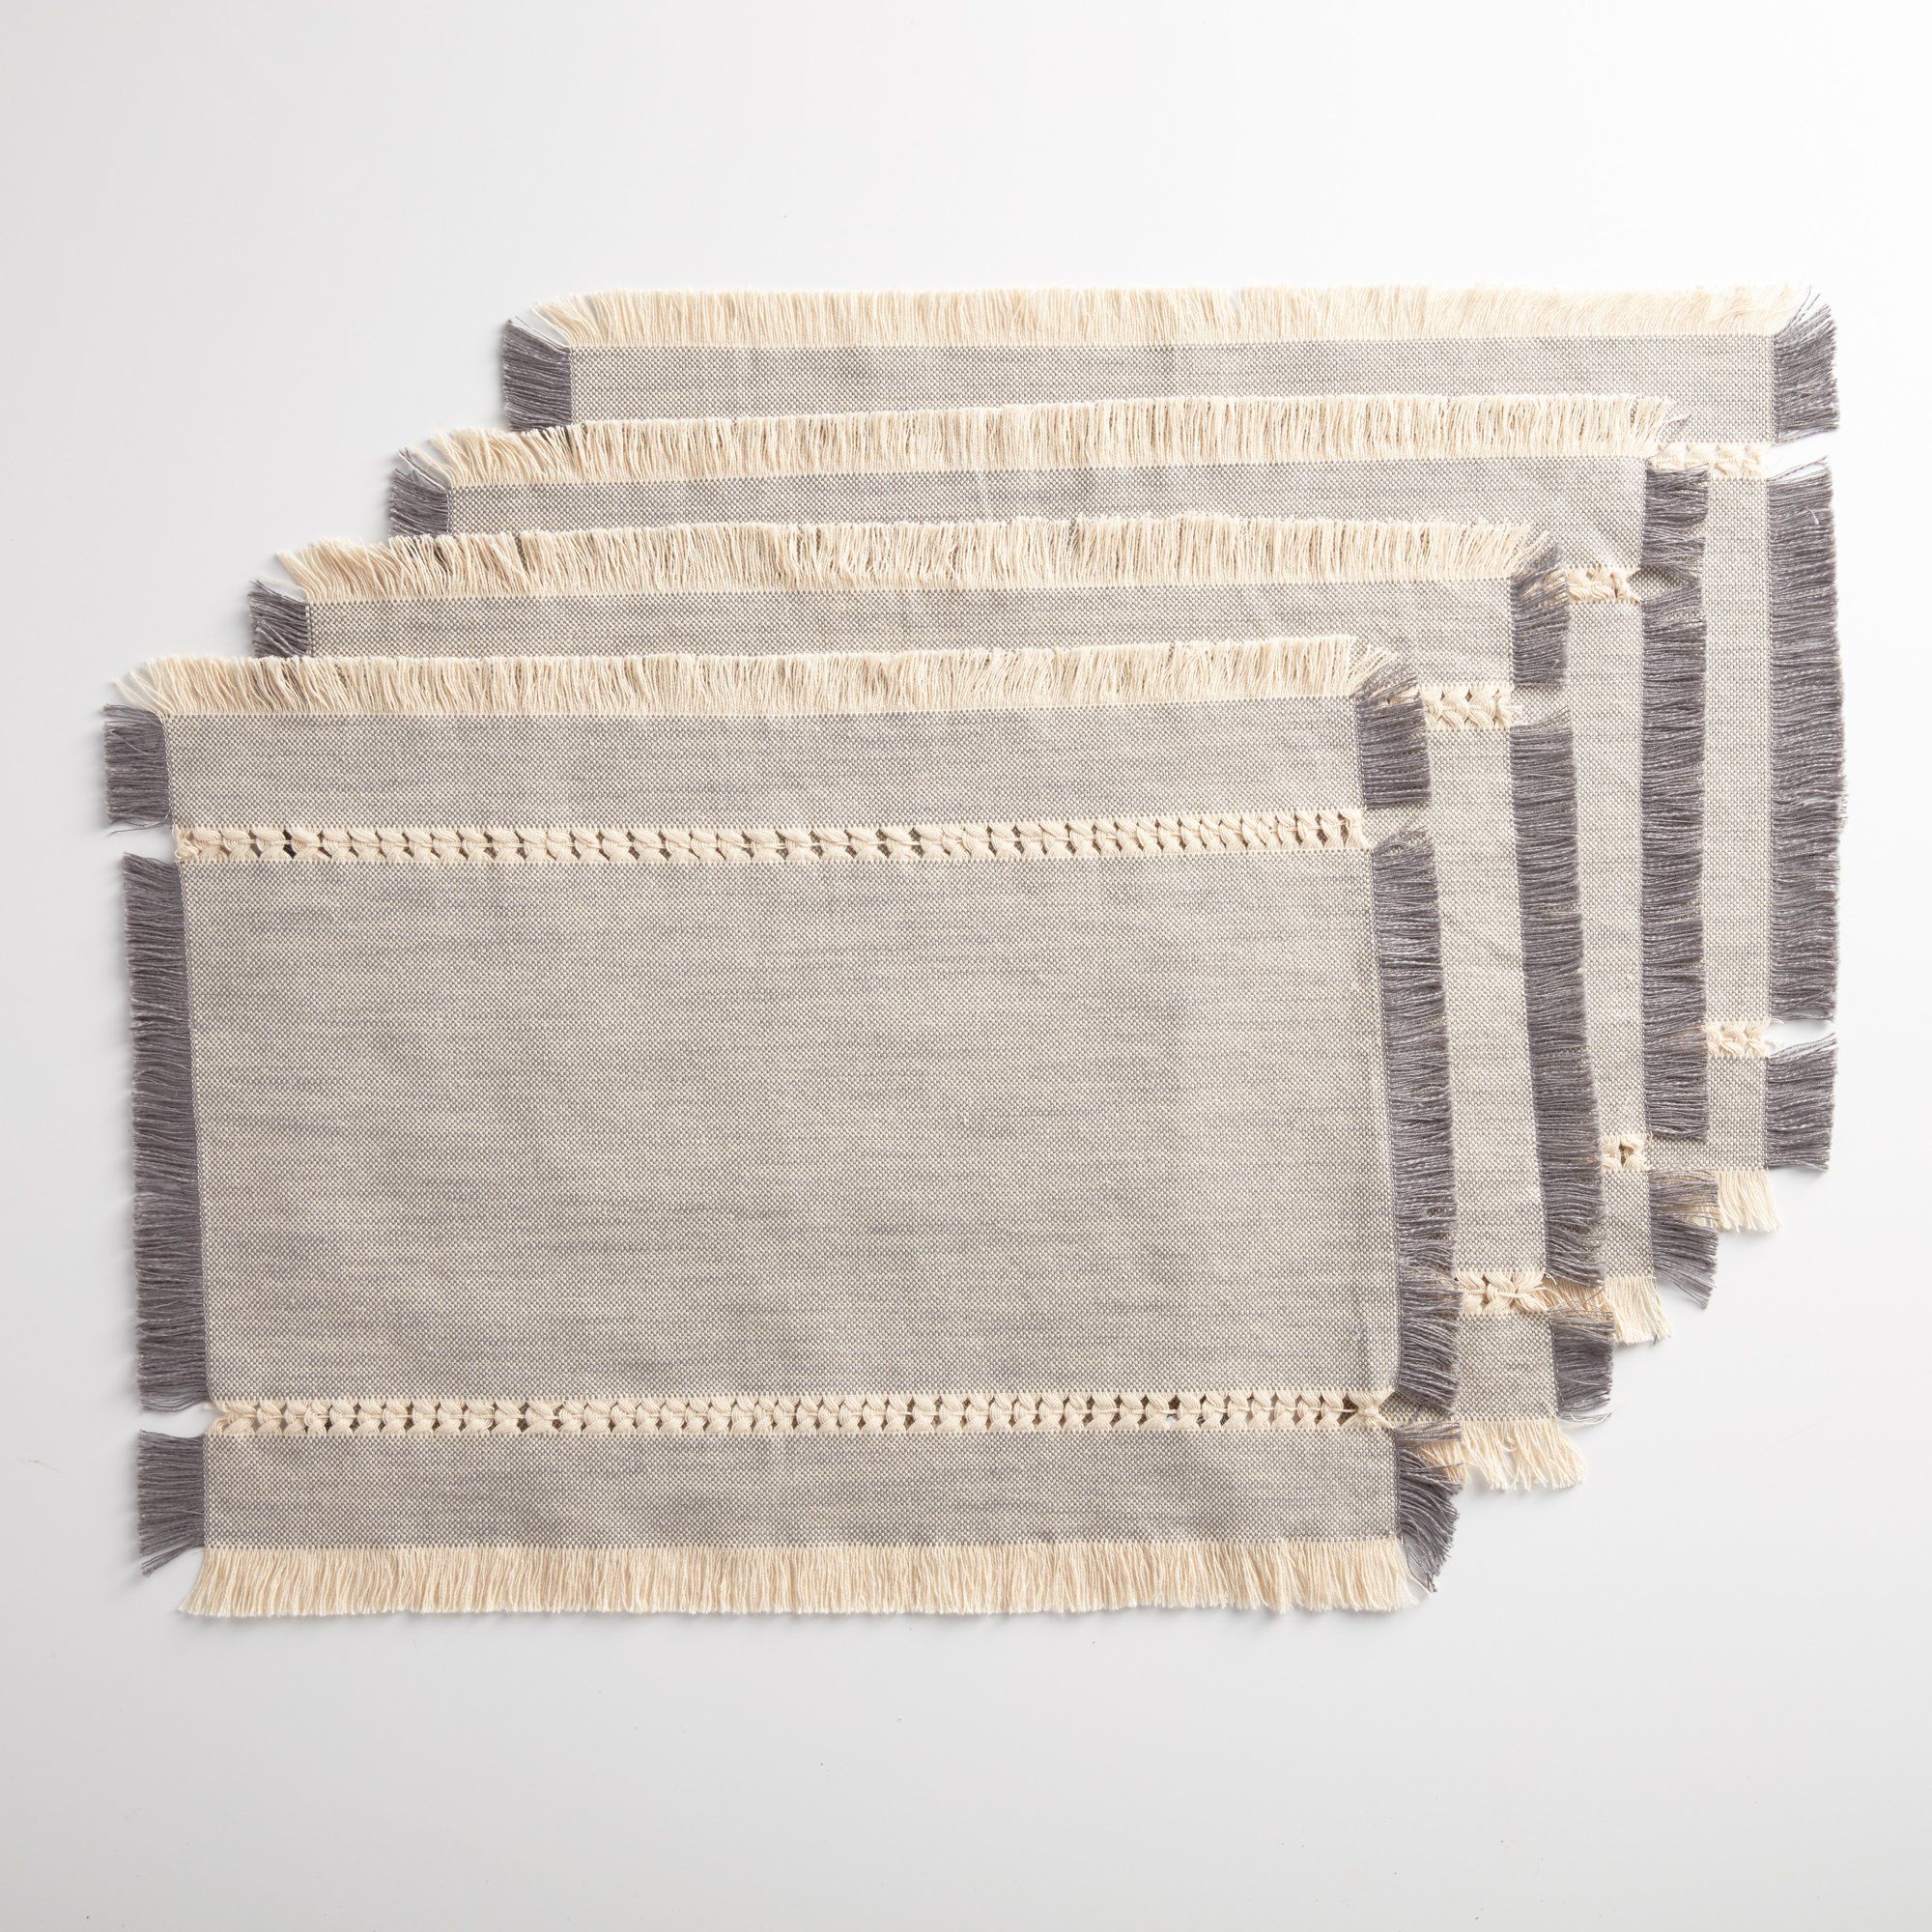 Better Homes & Gardens Woven Table Placemat with Fringe, Gray, 4 Piece Set | Walmart (US)